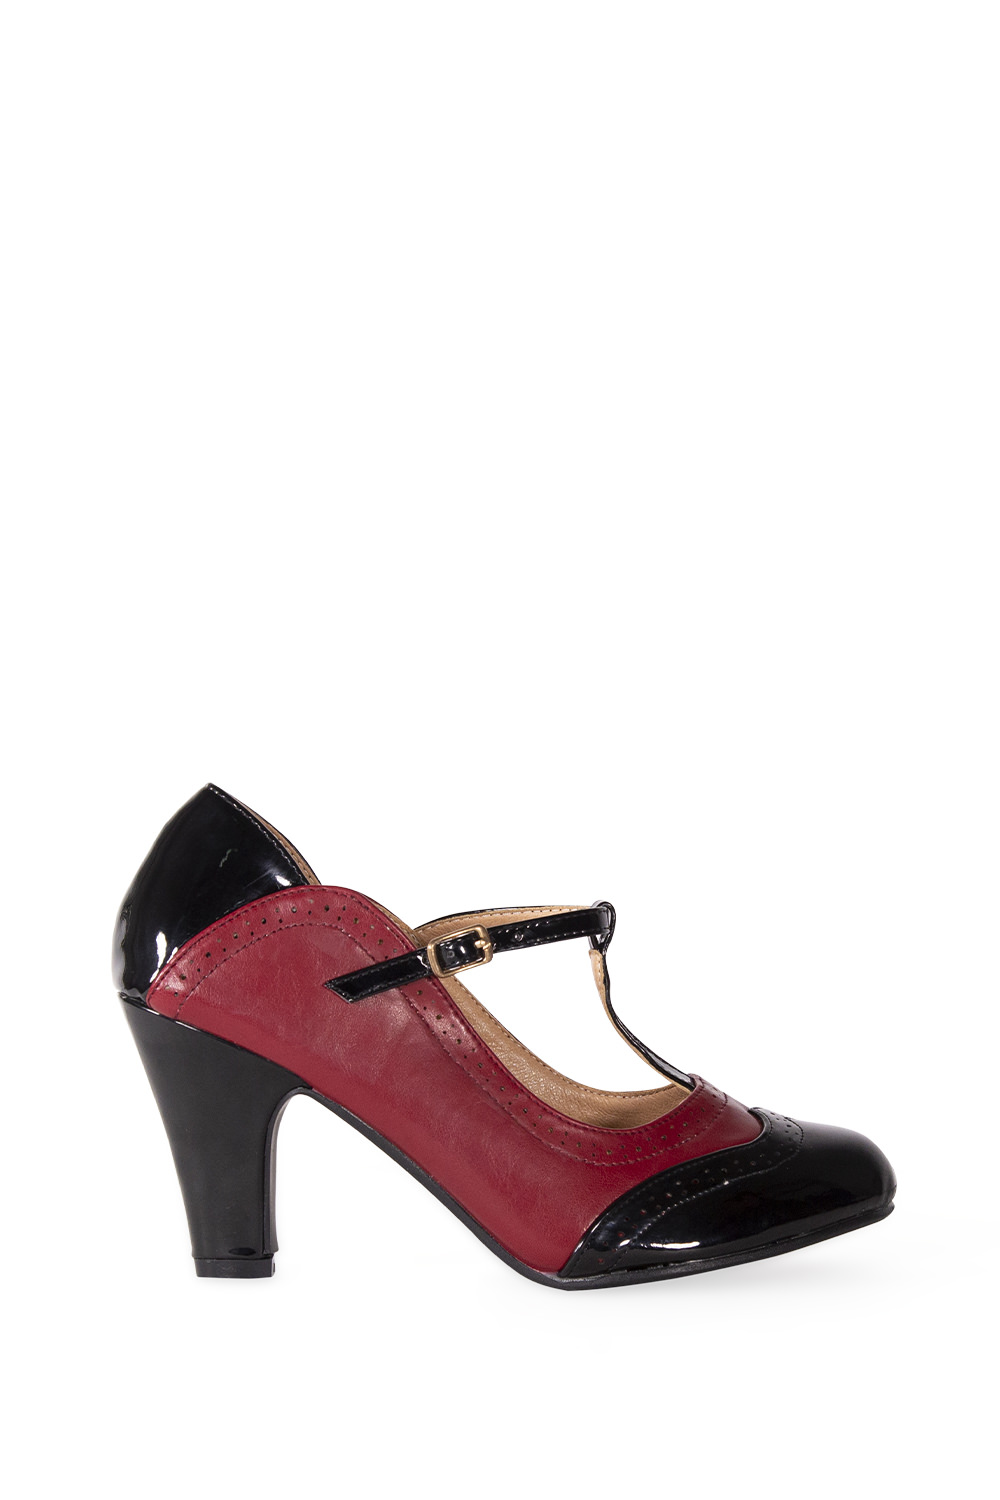 Banned Retro 50s Diva Blues T Strap Pumps In Burgundy And Black